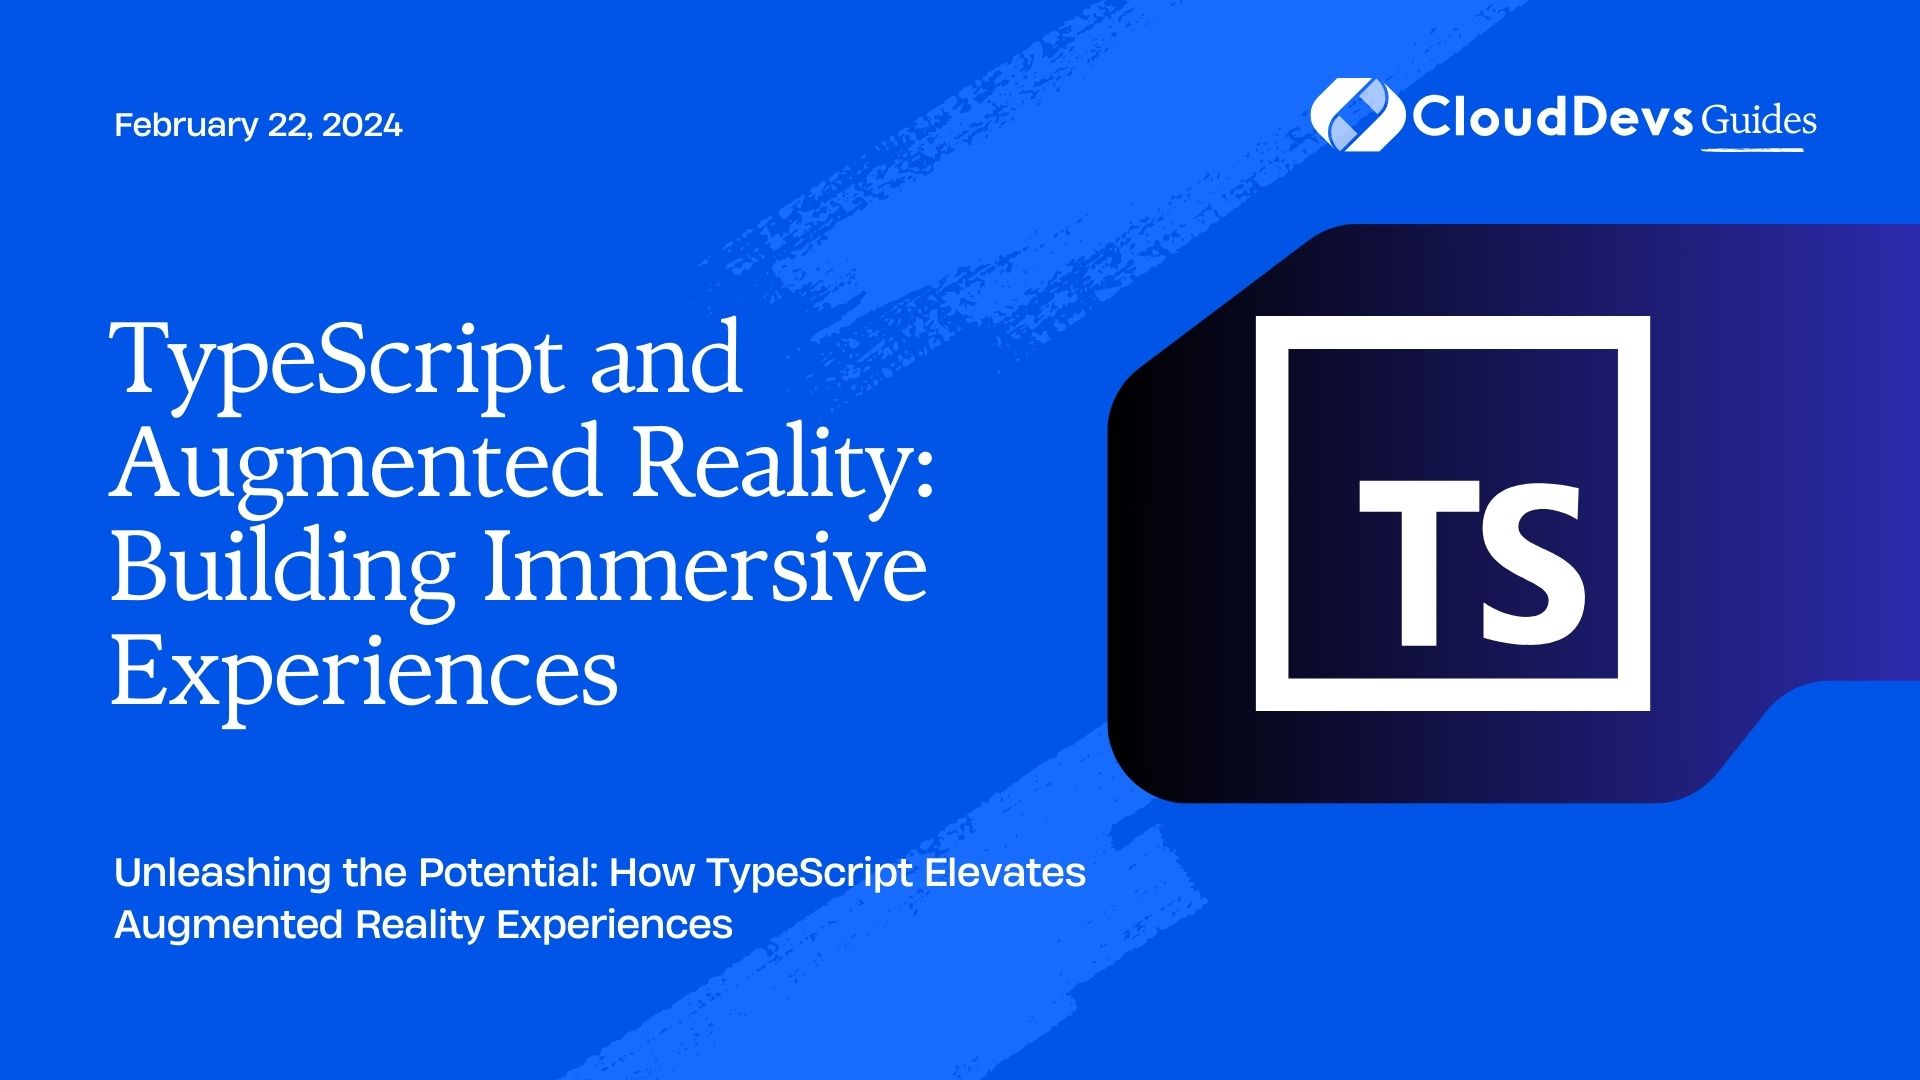 TypeScript and Augmented Reality: Building Immersive Experiences